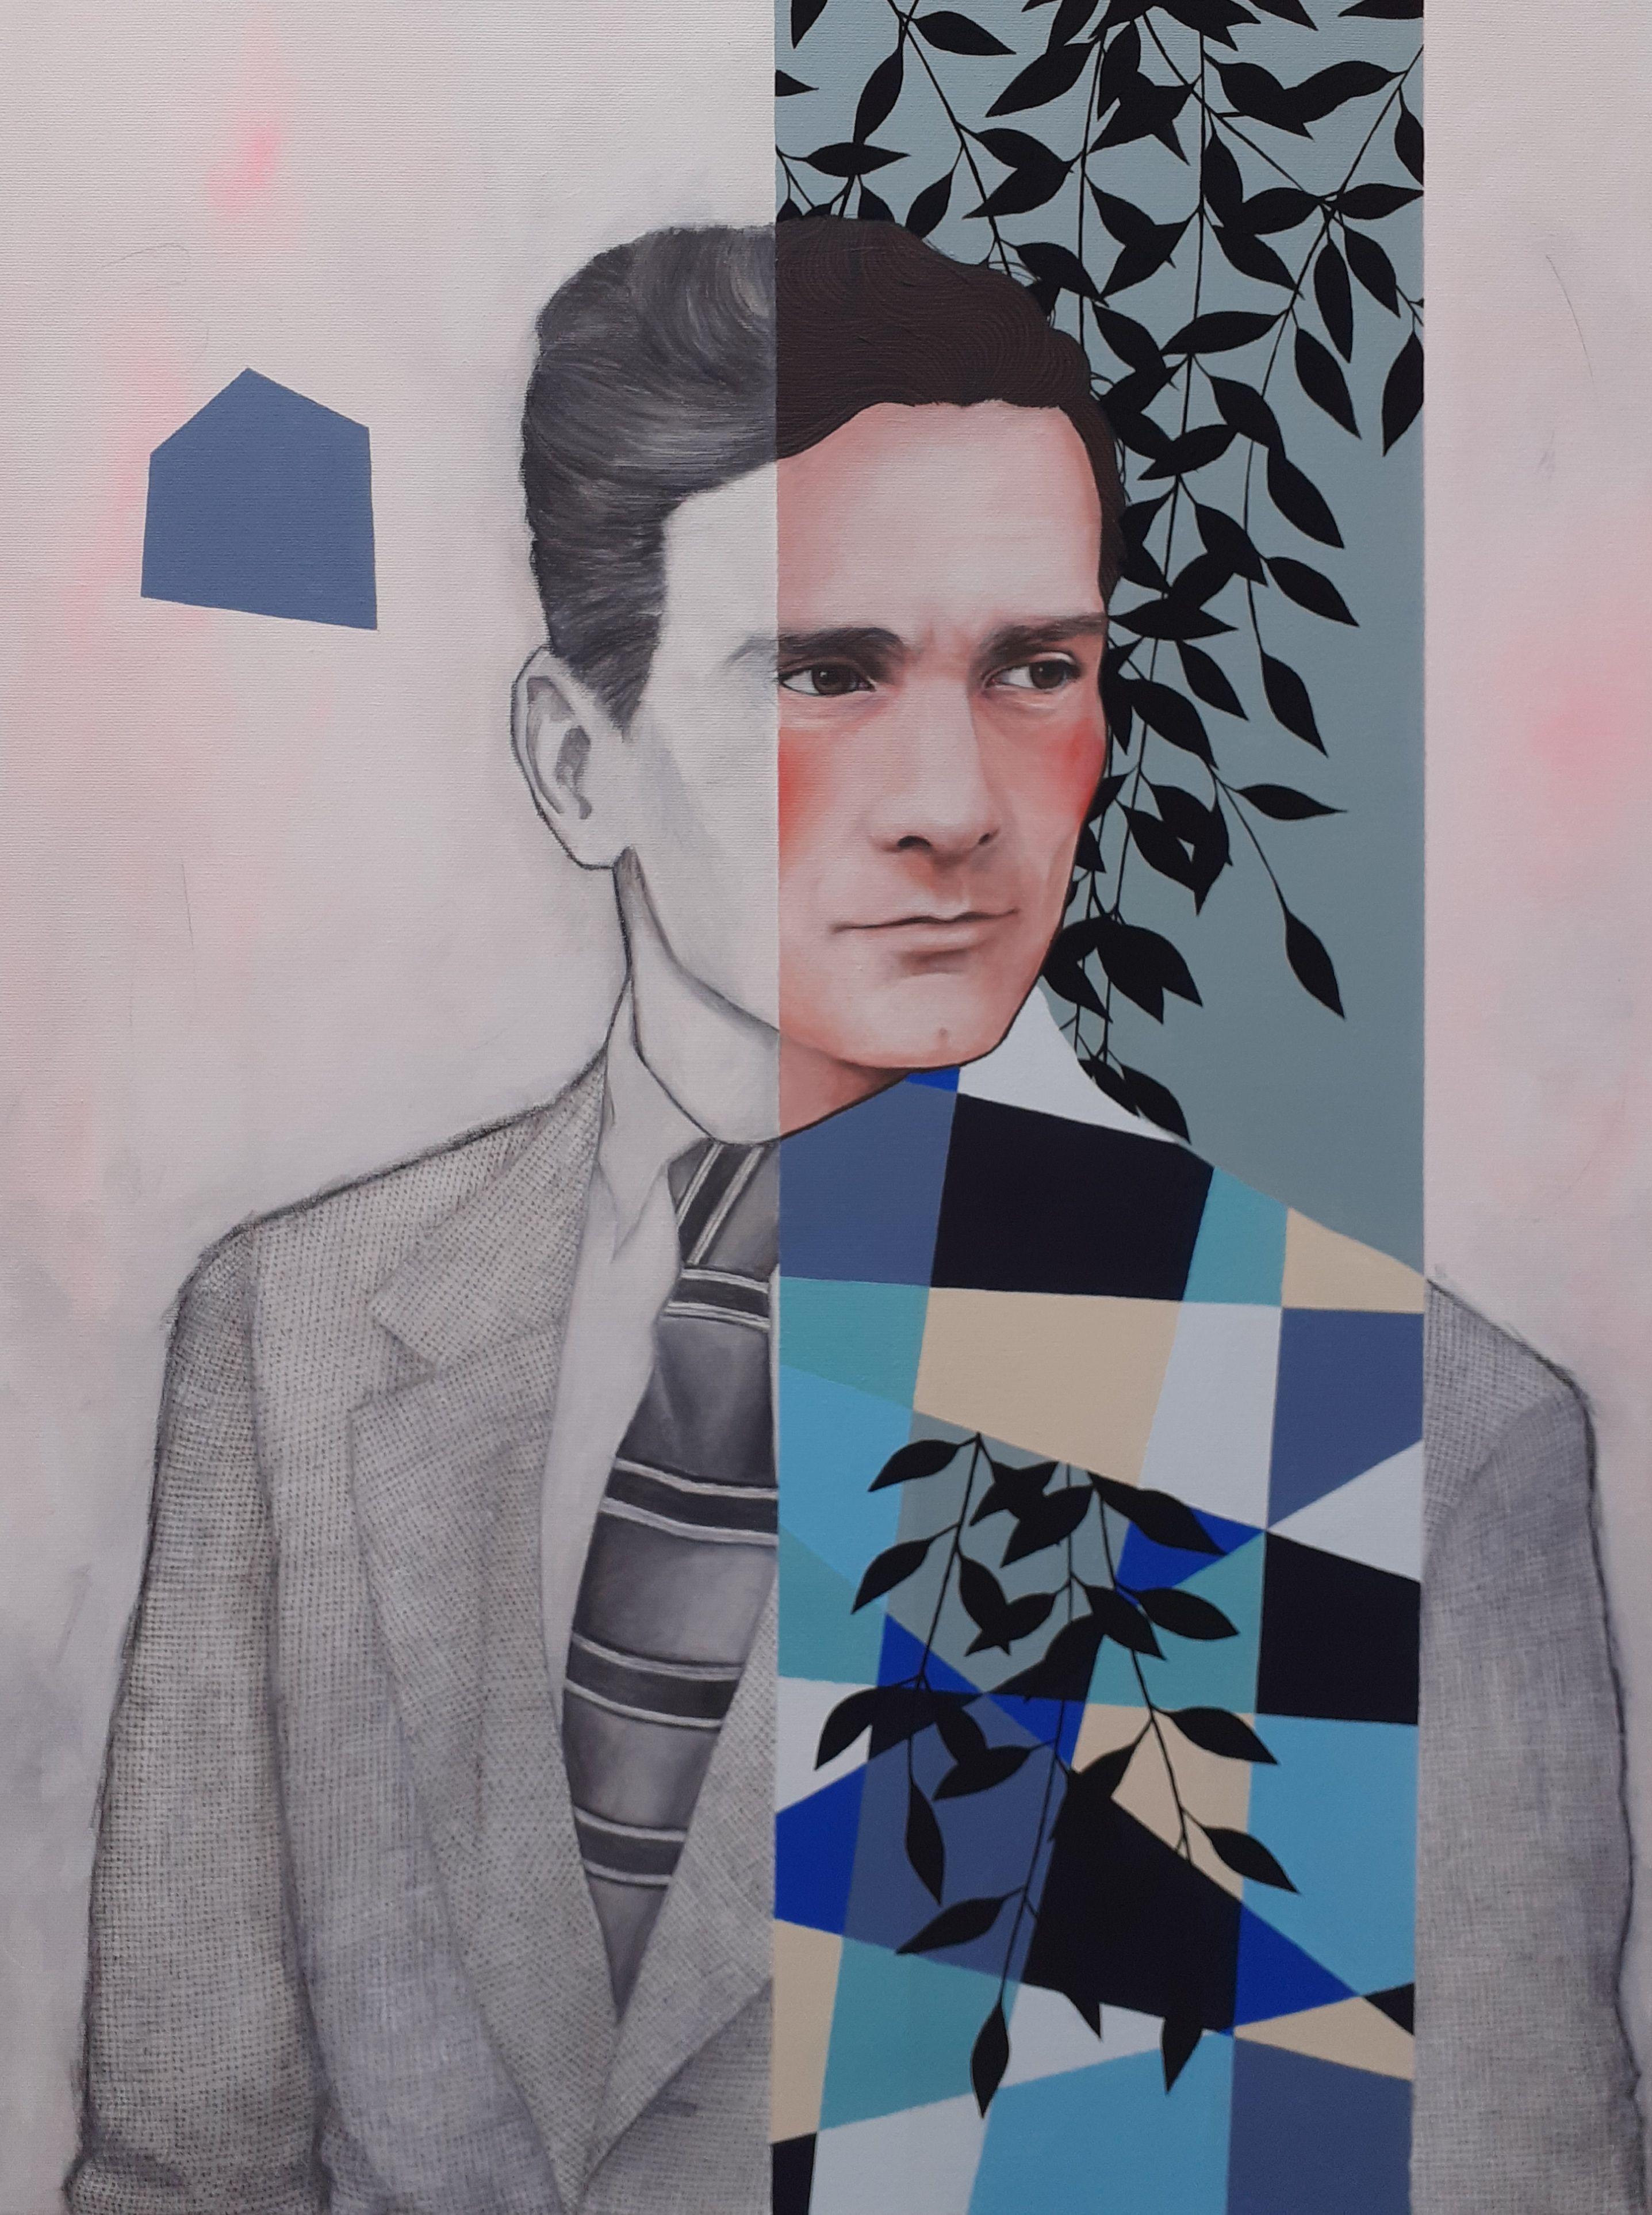 A humble homage to one of the greatest Italian scholar of all times, the port, director, author, journalist and painter Pier Paolo Pasolini.     Acrylic on stretched canvas, 60x80x4 cm. Ready to hang. :: Painting :: Surrealism :: This piece comes